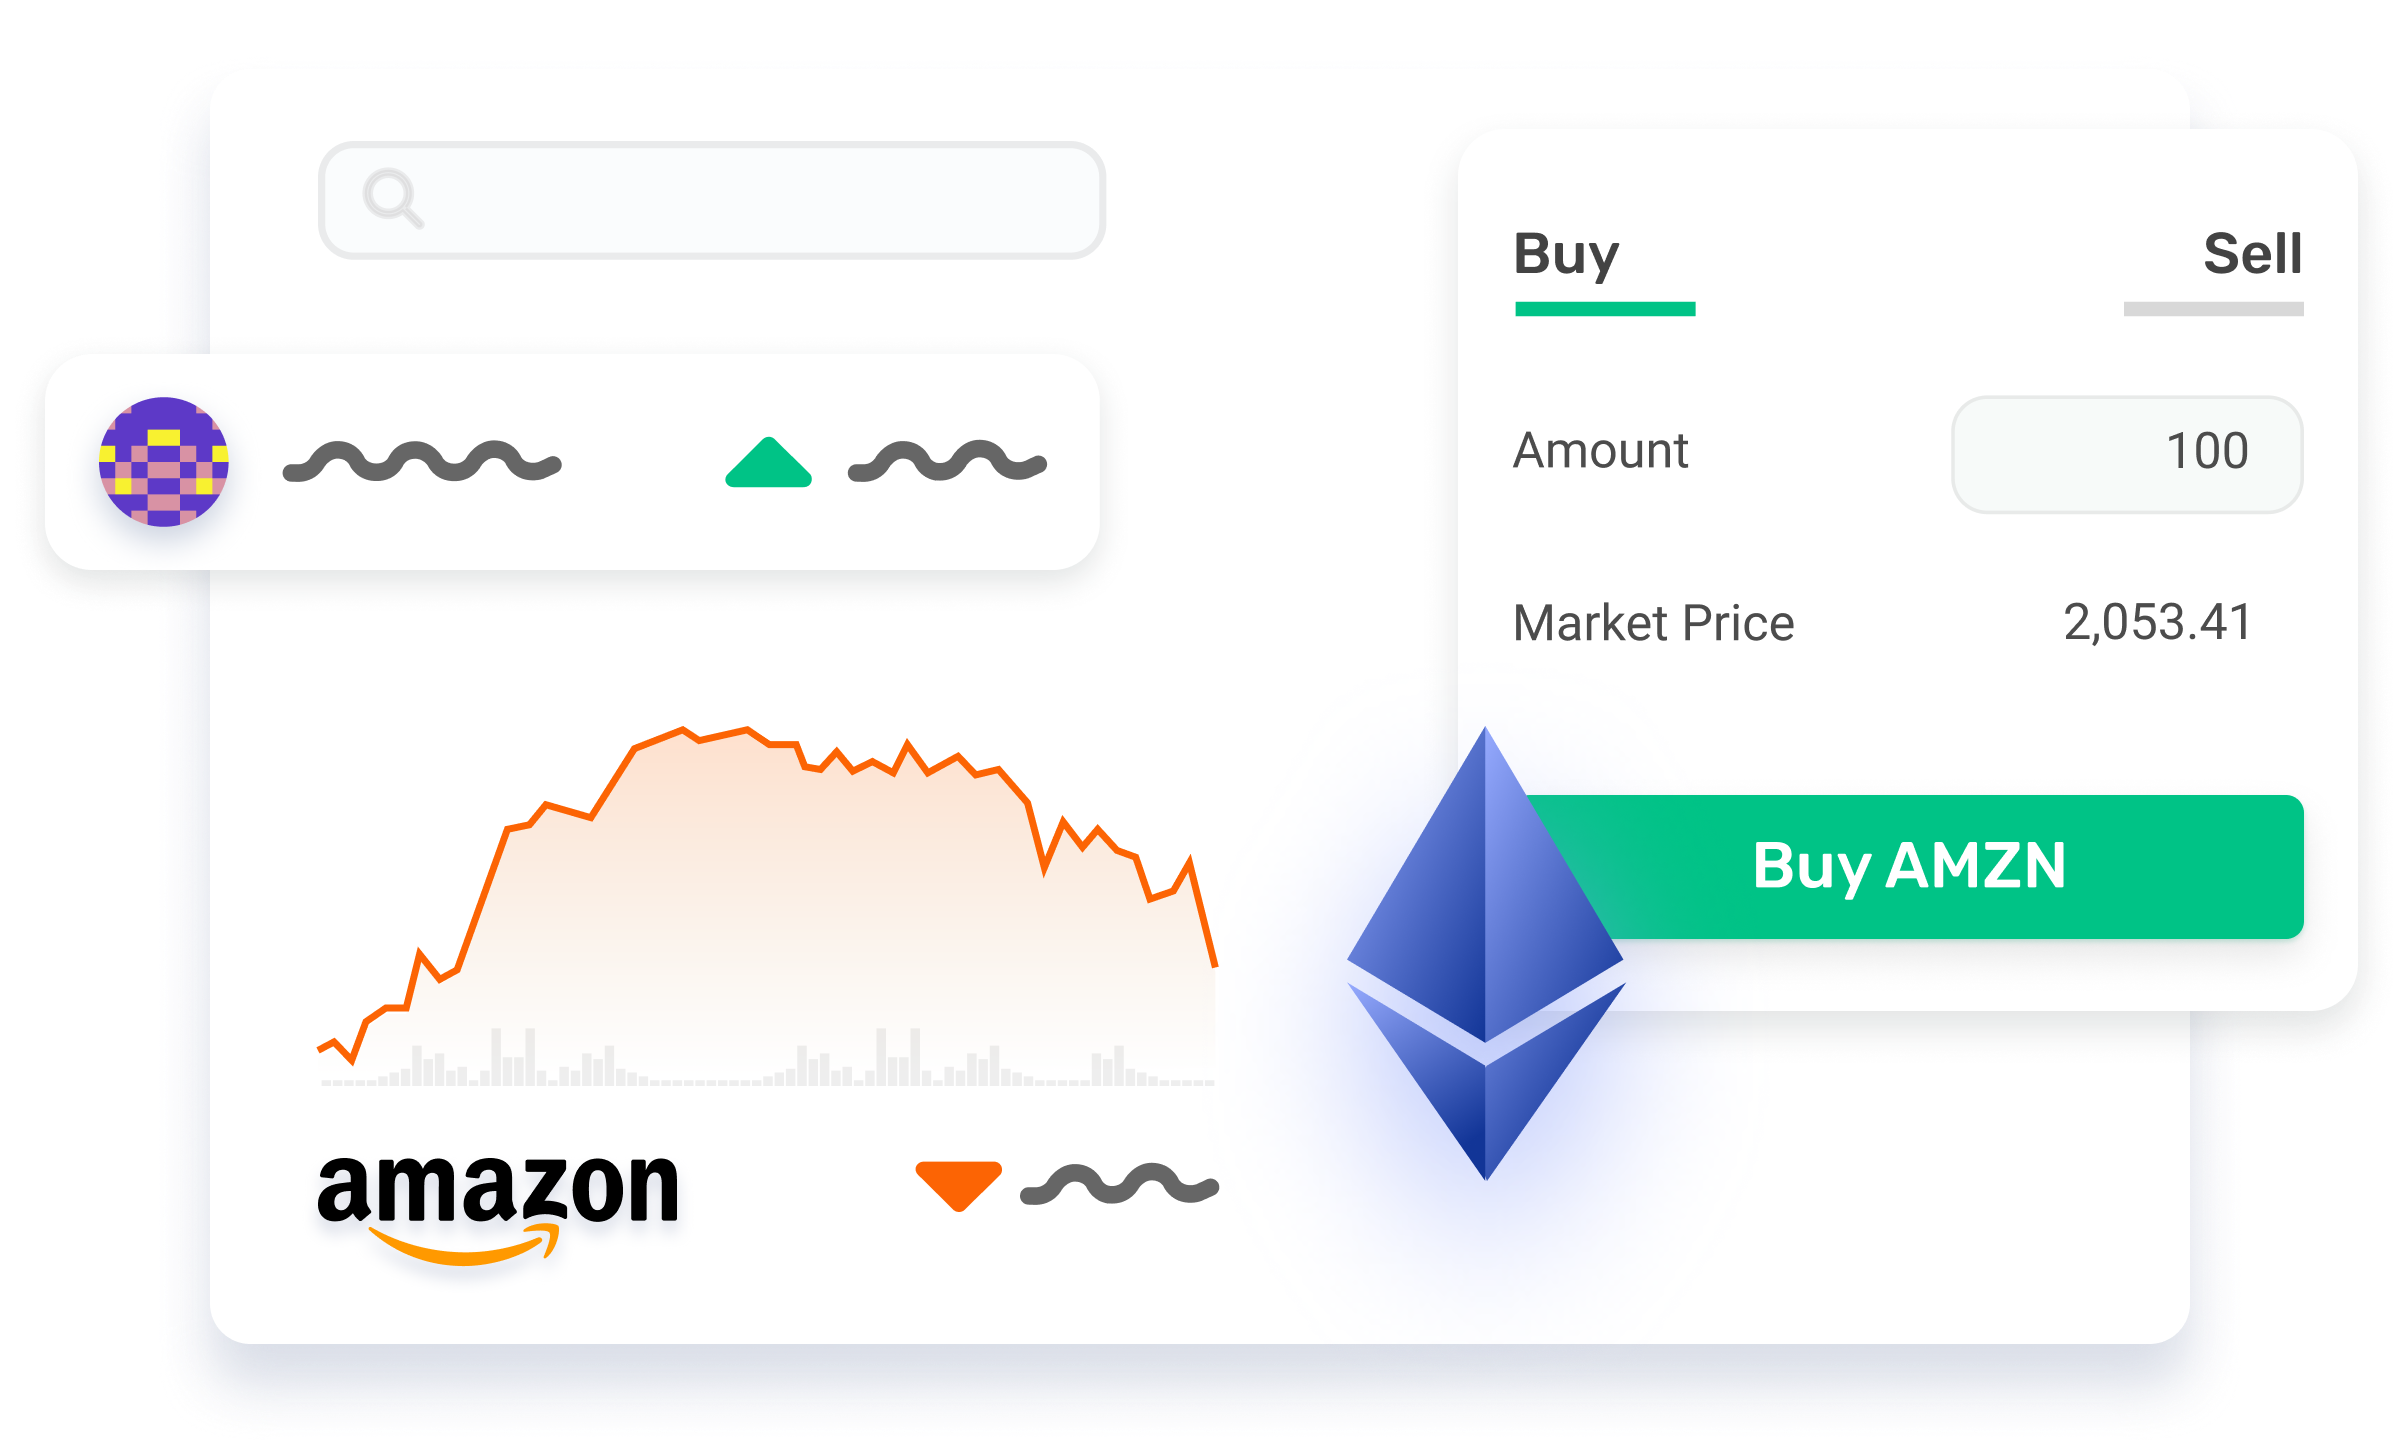 Morpher investment app mockup with focus on Amazon stock.